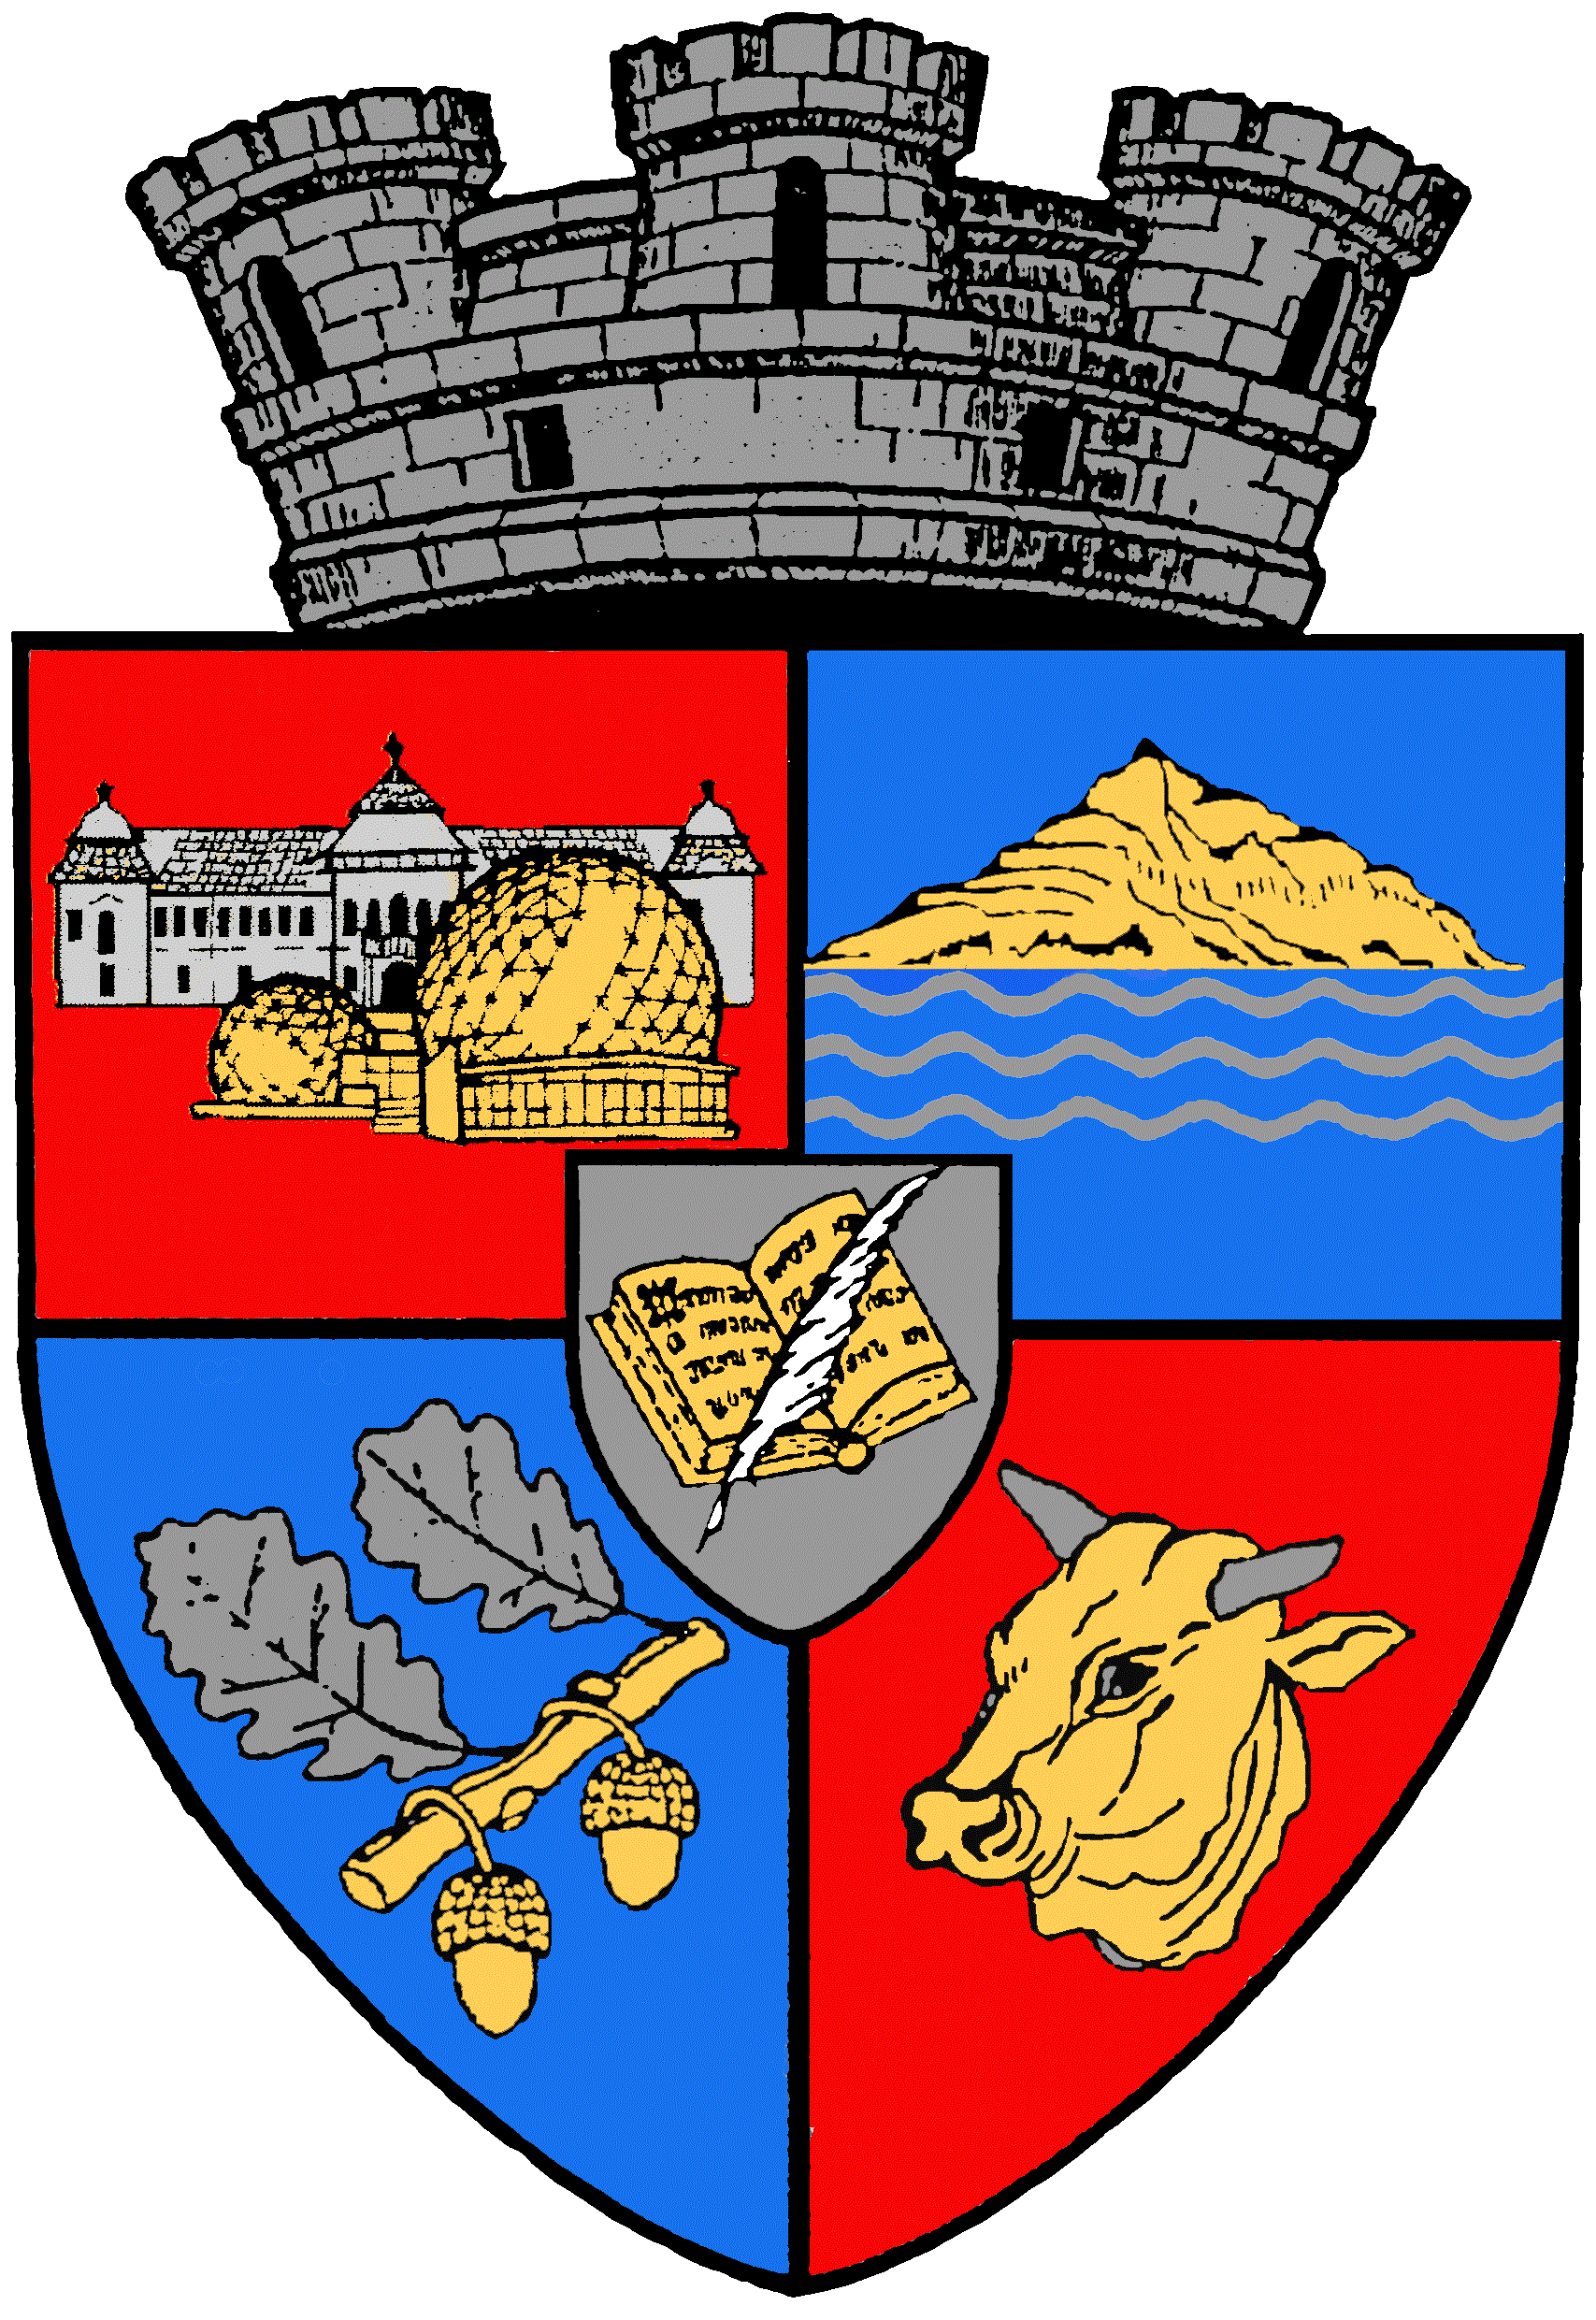 Coat of arms of Jibou